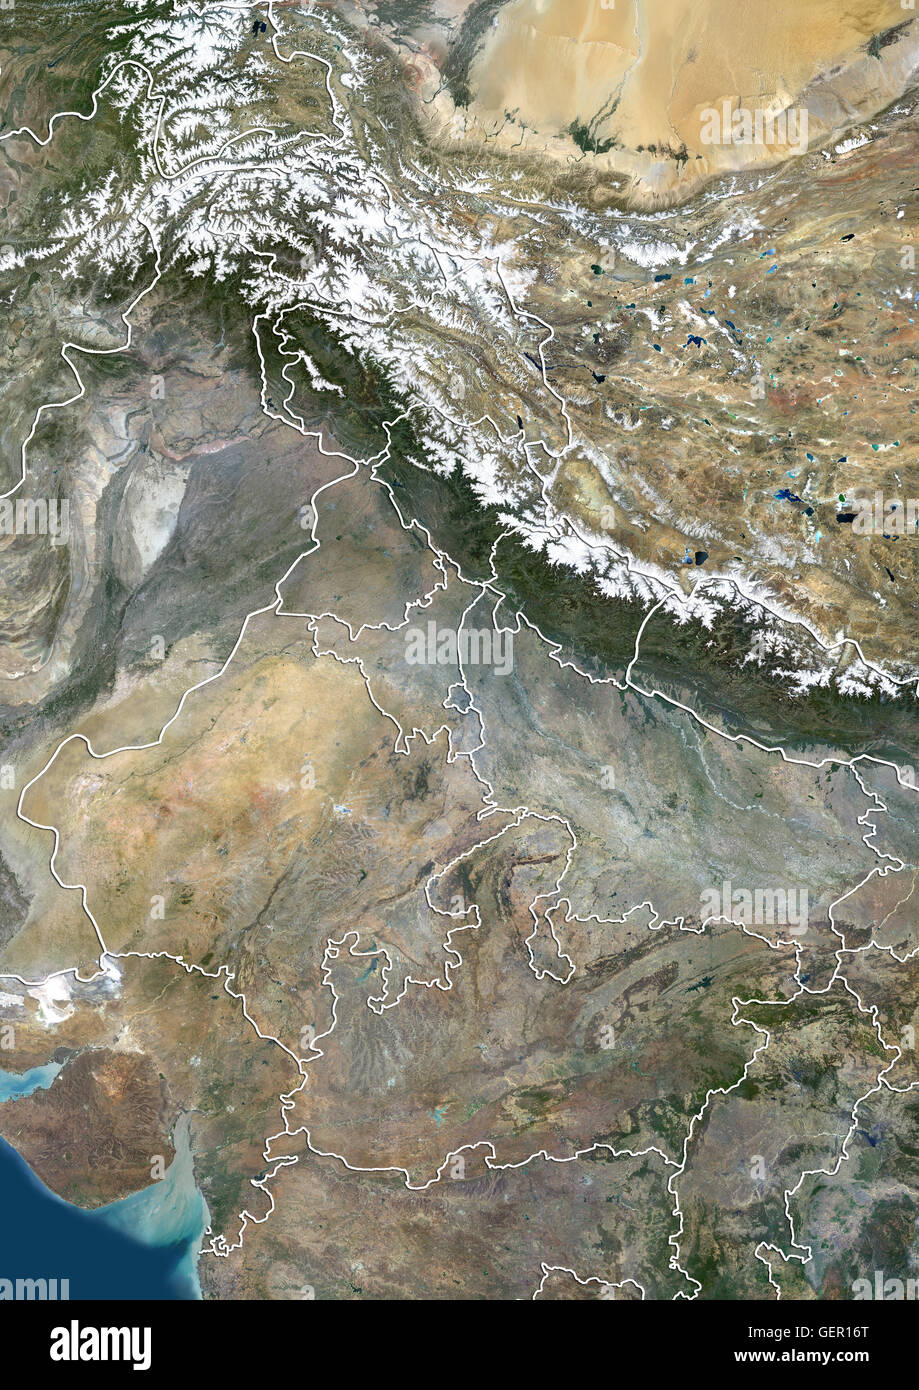 Satellite view of North India with administrative boundaries, including boundaries of Jammu and Kashmir disputed areas. This image was compiled from data acquired by Landsat 8 satellite in 2014. Stock Photo